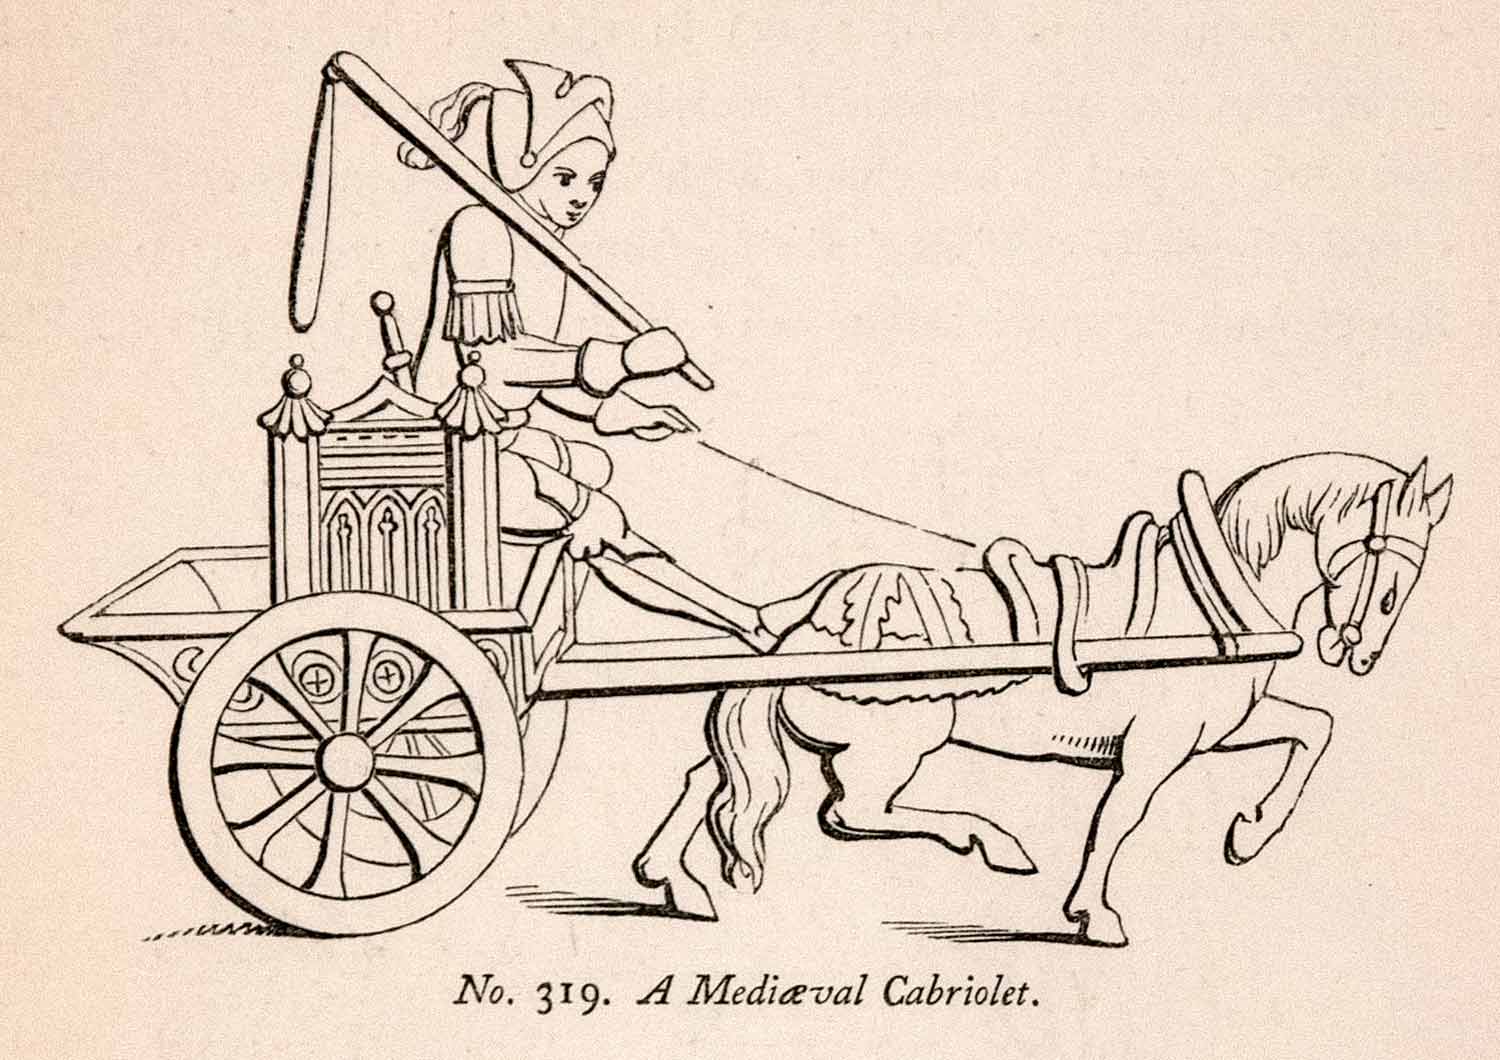 1862 Wood Engraving Frederick William Fairholt Medaeval Cabriolet Chariot XGBA4